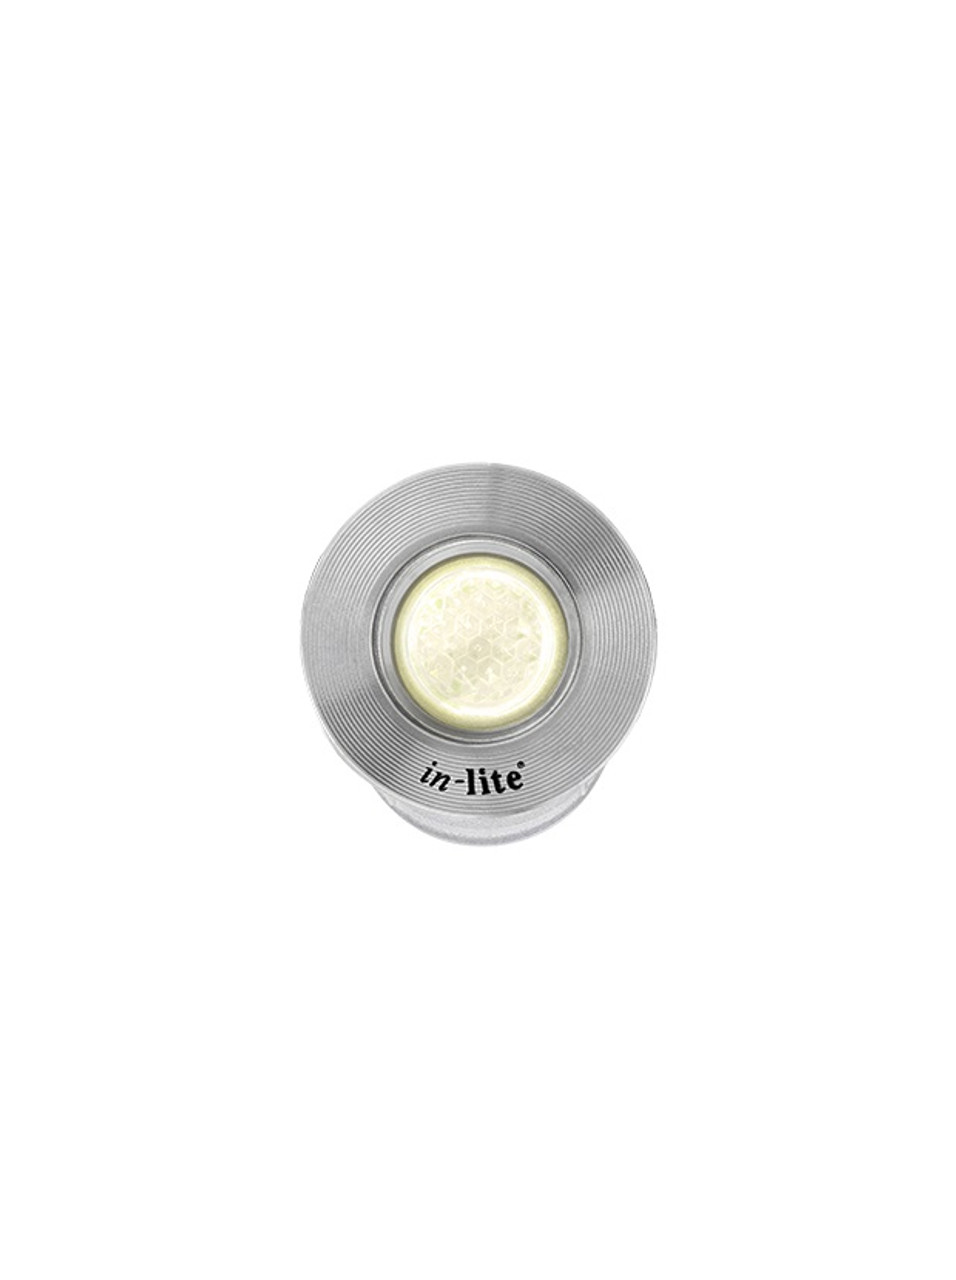 The HYVE 22 RVS WARM is a small but bright 22mm recessed light. This fixture comes out of the box with a stainless steel ring and is ideal for border applications, decks, retaining walls, hardscape steps, and so much more! 